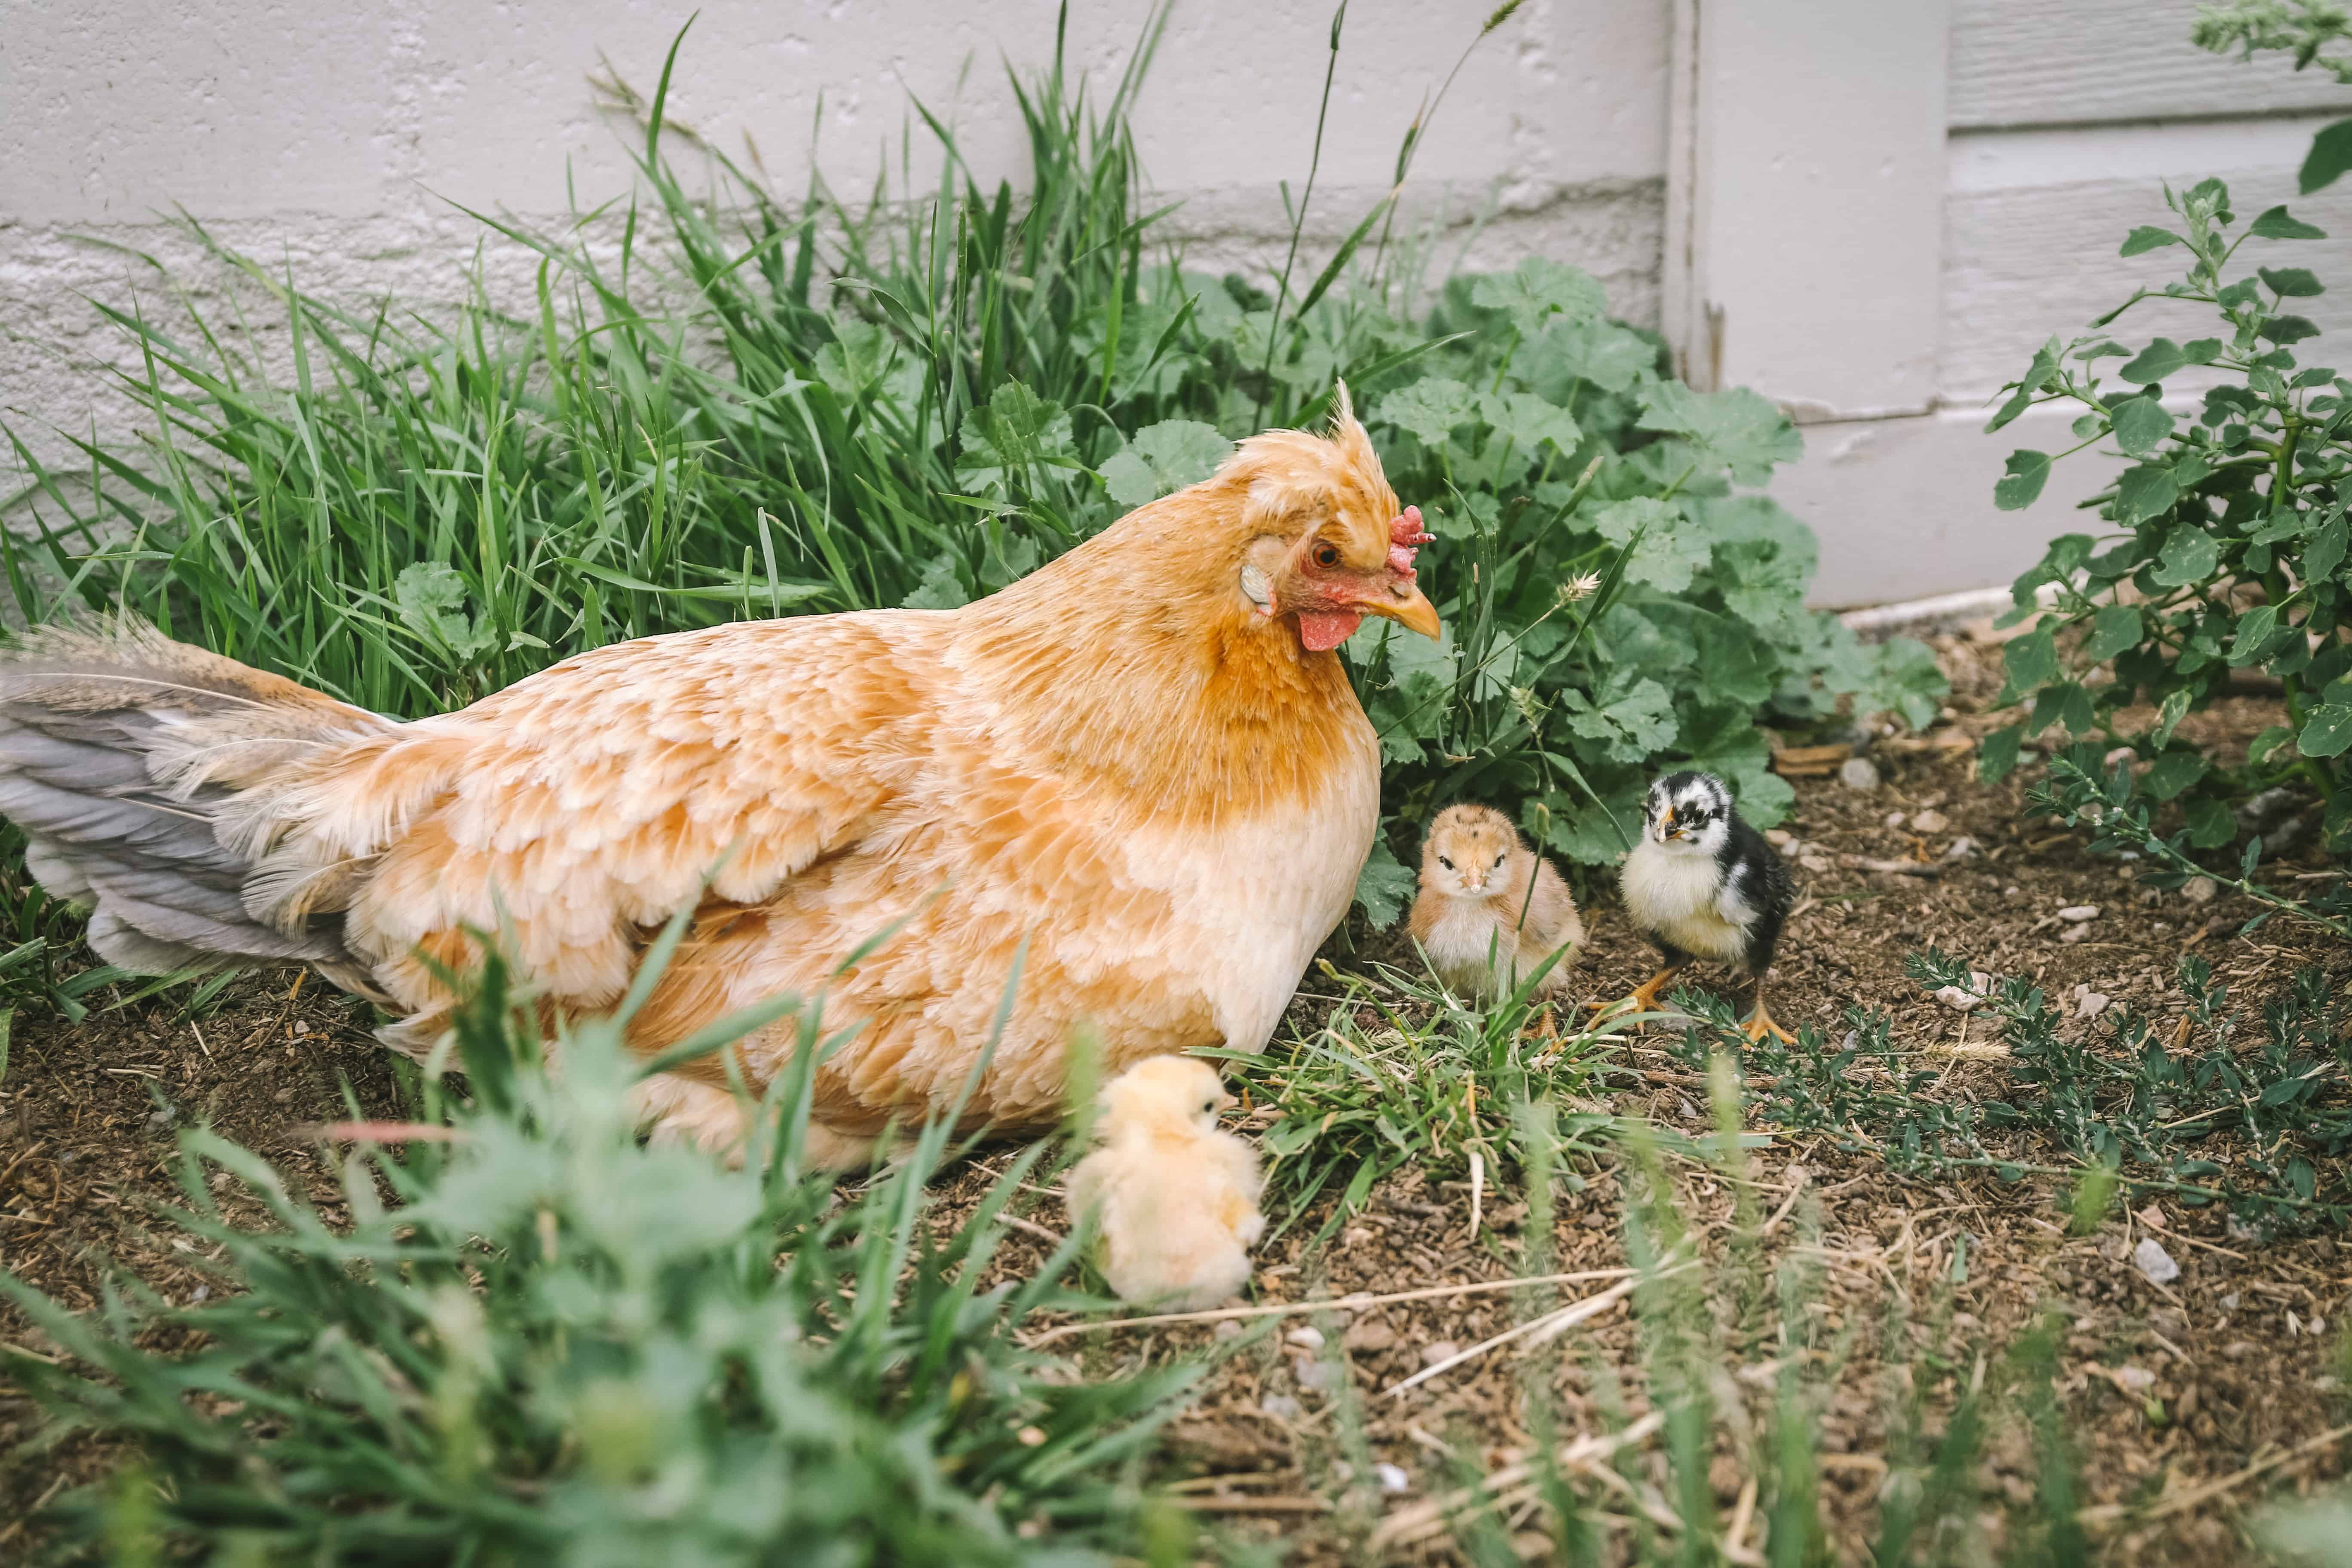 What Is A Broody Hen?